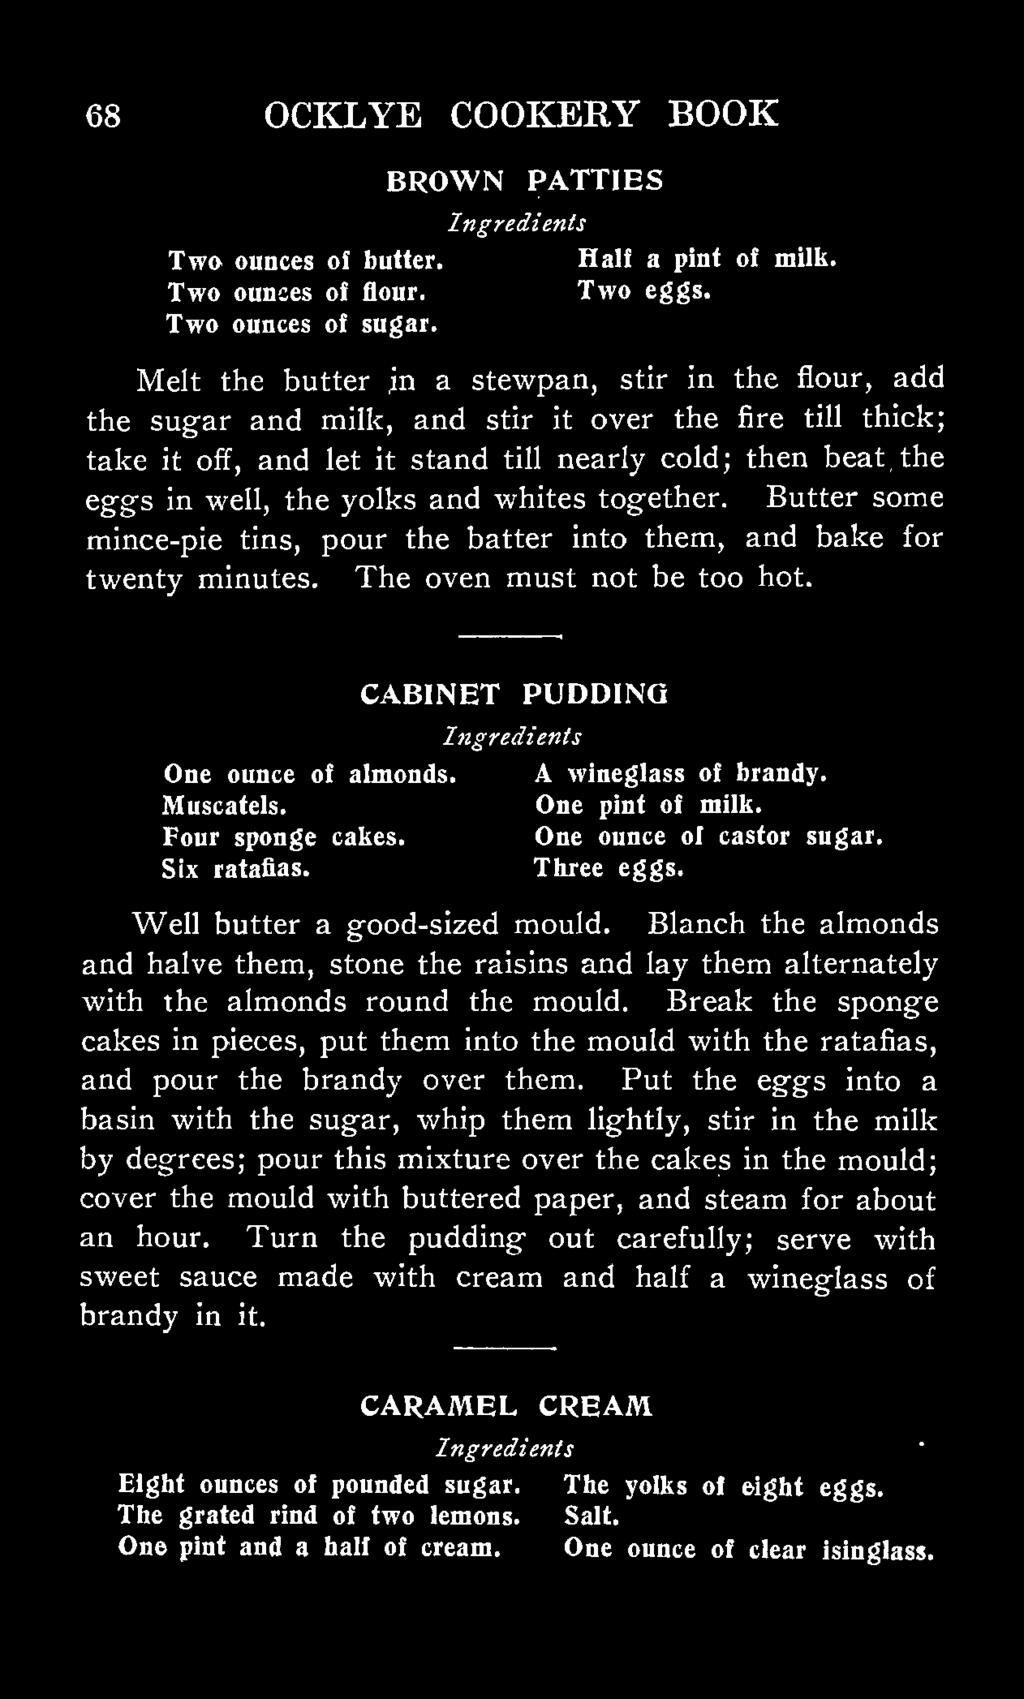 and whites together. Butter some mince-pie tins, pour the batter into them, and bake for twenty minutes. The oven must not be too hot. CABINET PUDDING One ounce of almonds. A wineglass of brandy.